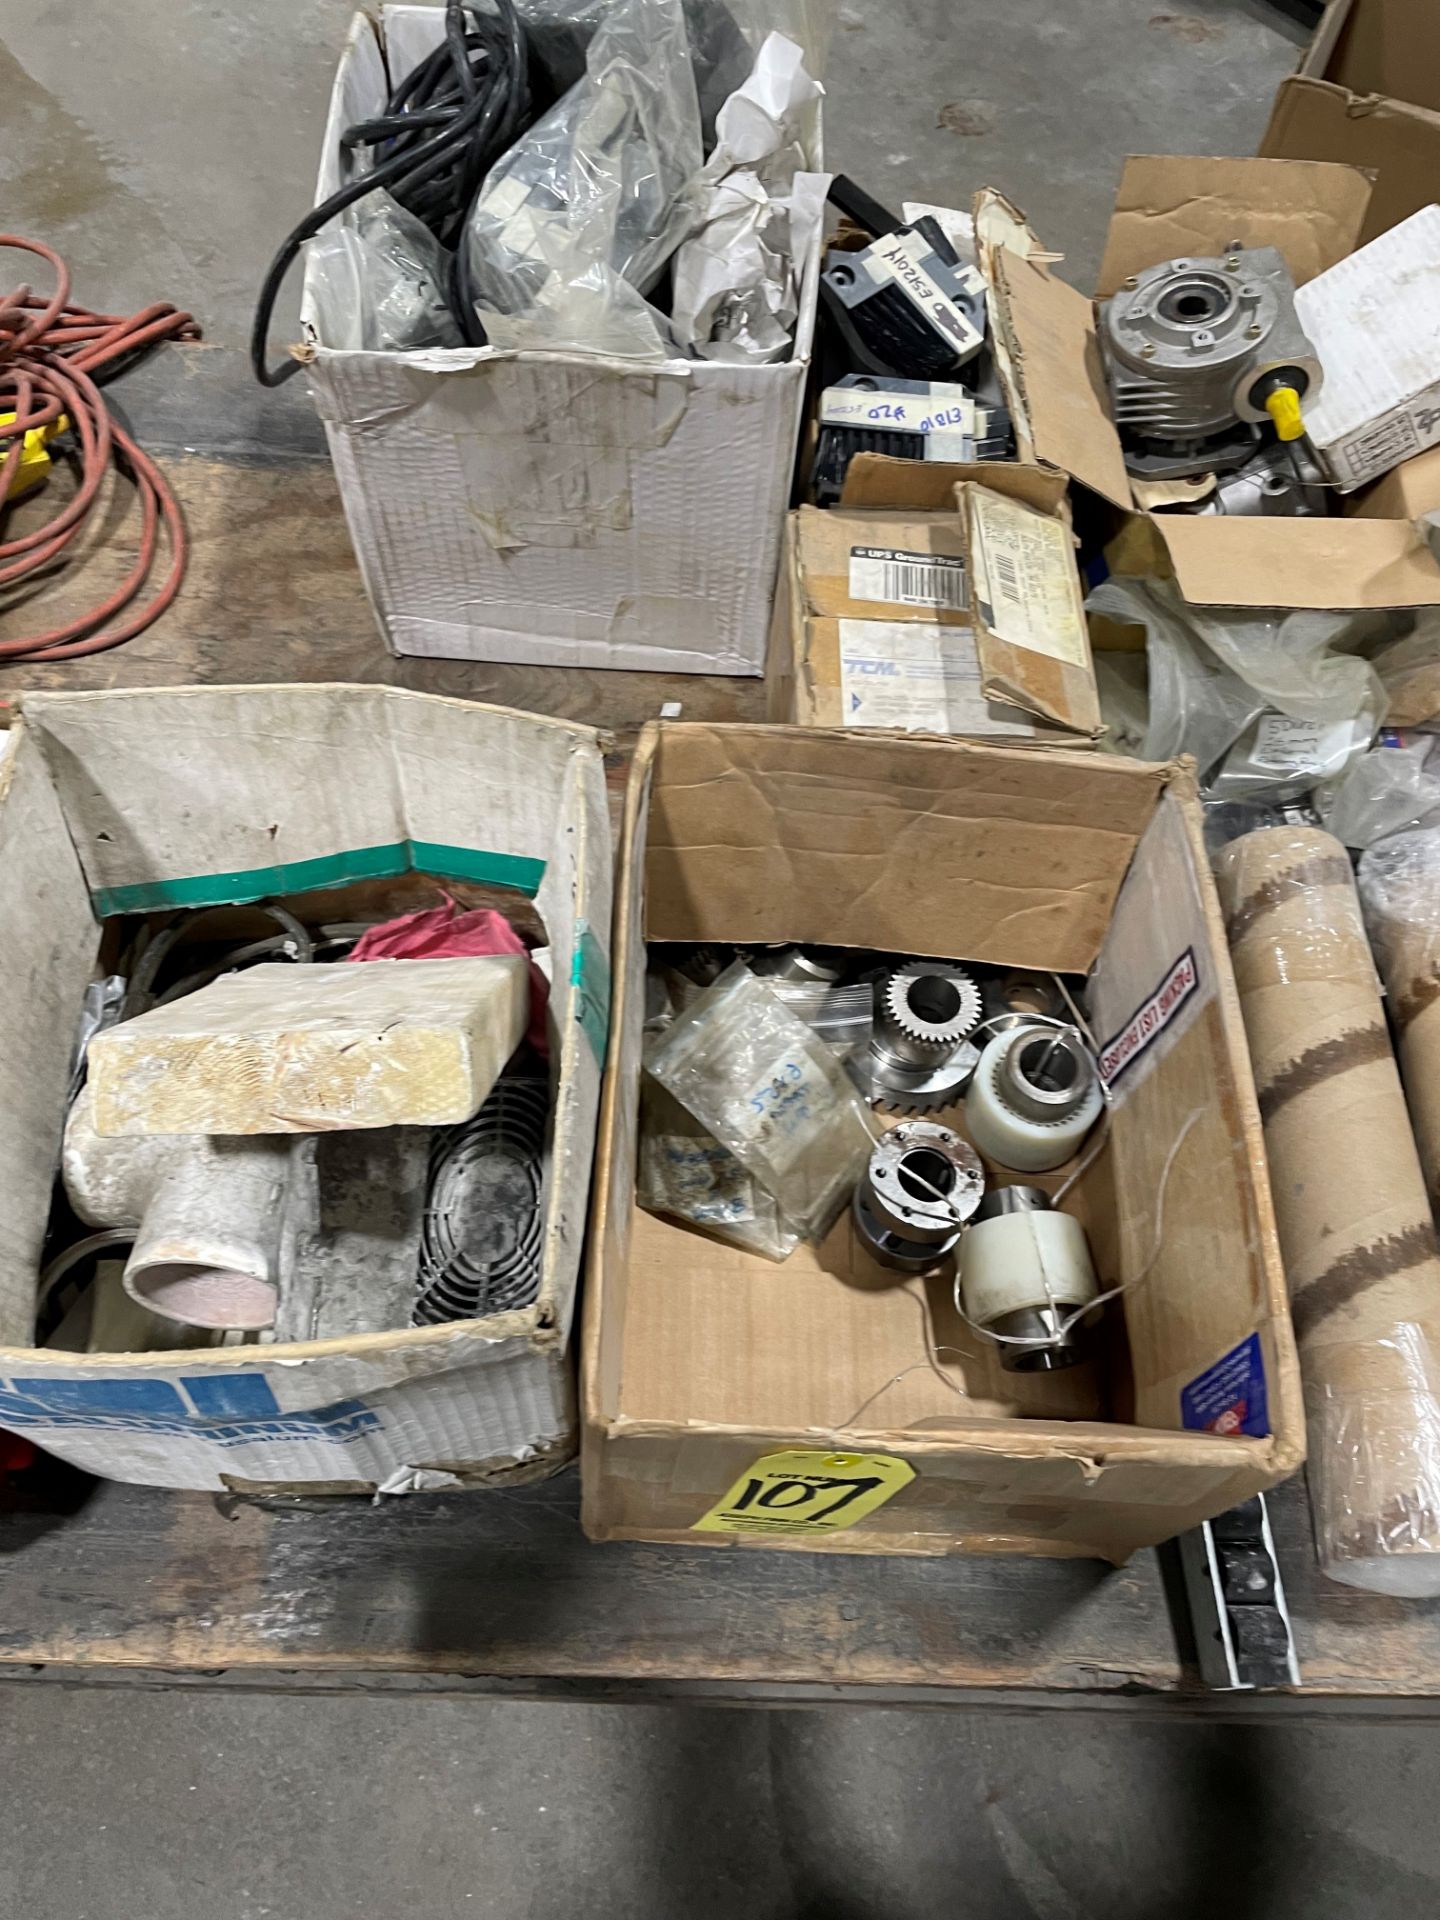 LOT Asst. Gears, Belts, Hoses, Connectors, Clamps, Etc. for the Bovone Edging Machines - Image 2 of 4